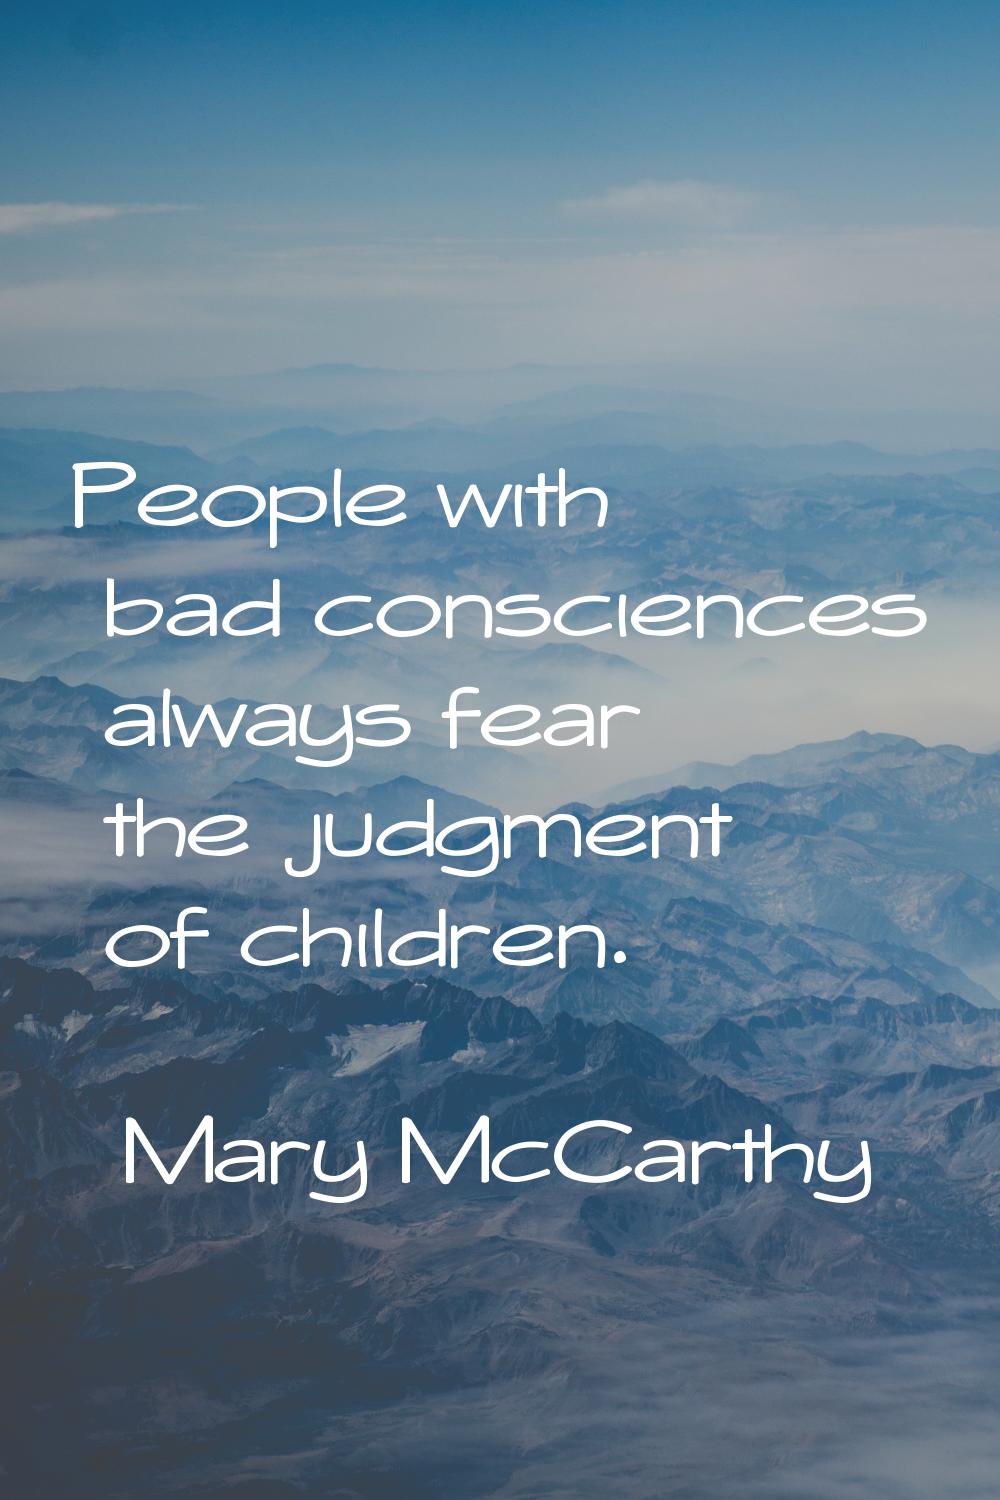 People with bad consciences always fear the judgment of children.